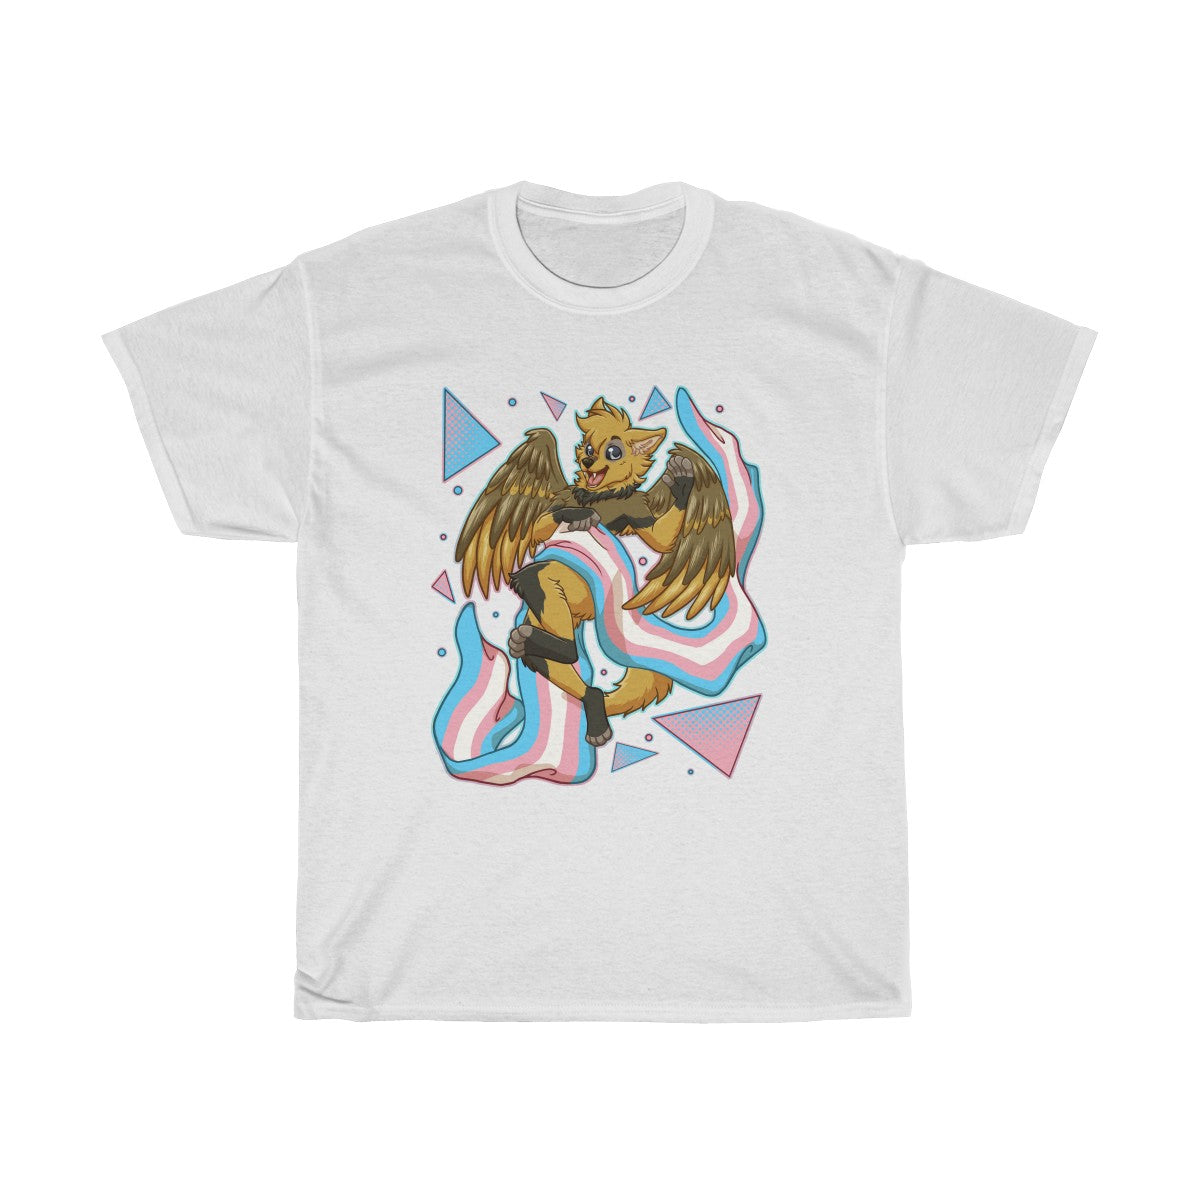 The Wolf Dragon - T-Shirt T-Shirt Cocoa White S 